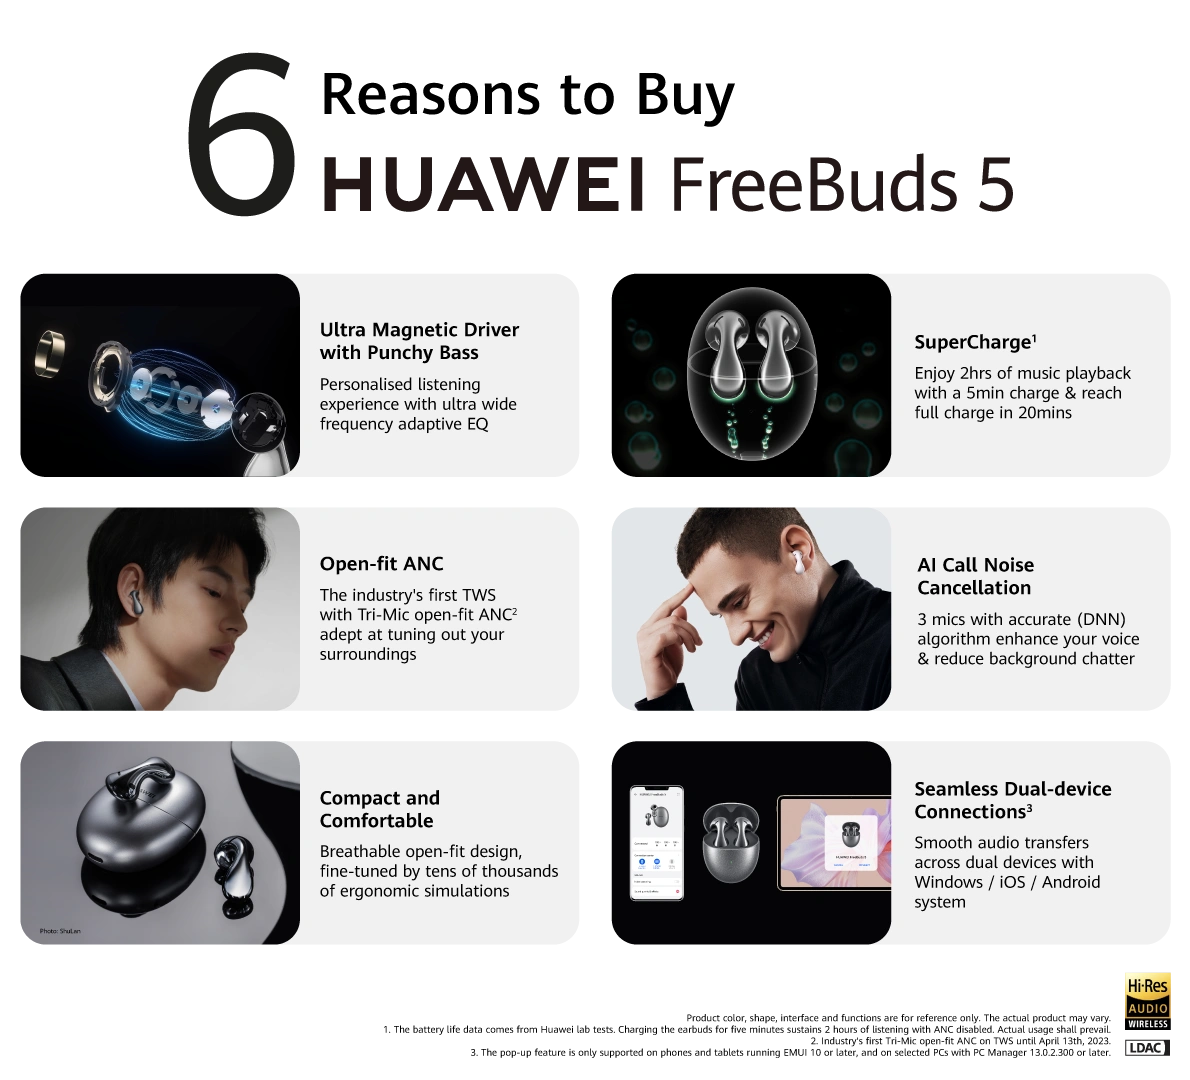 HUAWEI FreeBuds 5 Wireless Charger Silver Frost - HFreeBuds5